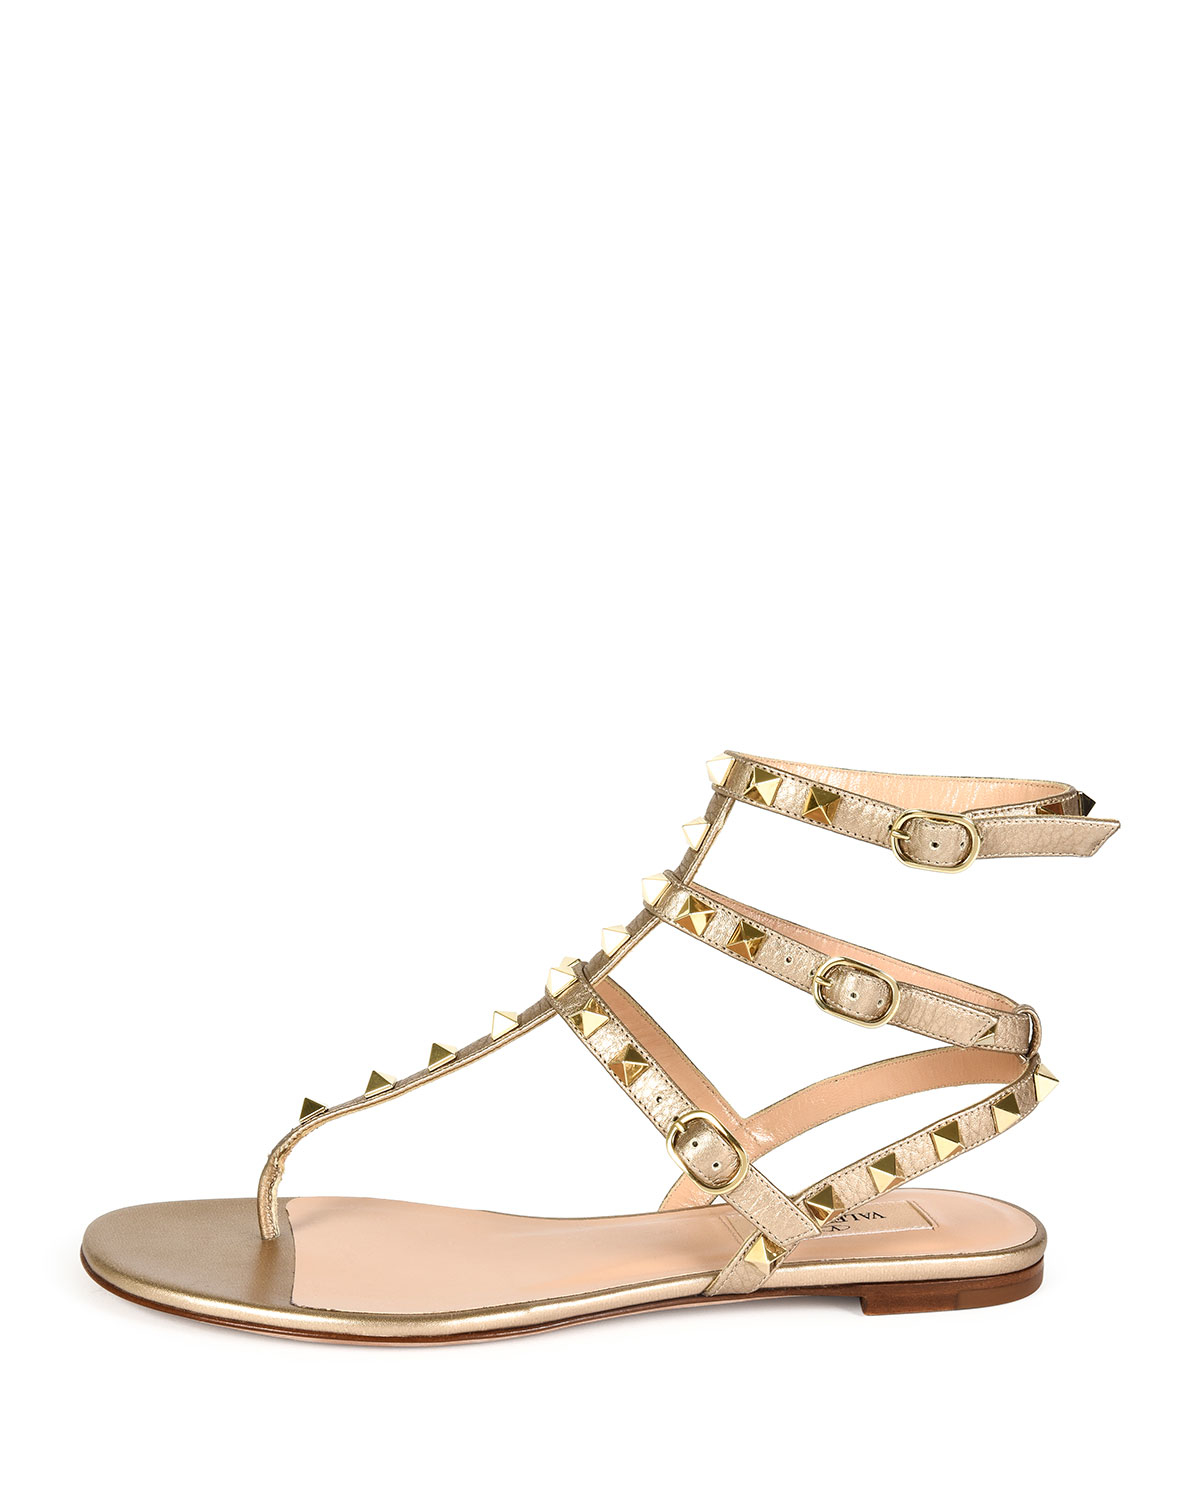  Valentino  Rockstud Leather Gladiator Sandals  in Natural Lyst